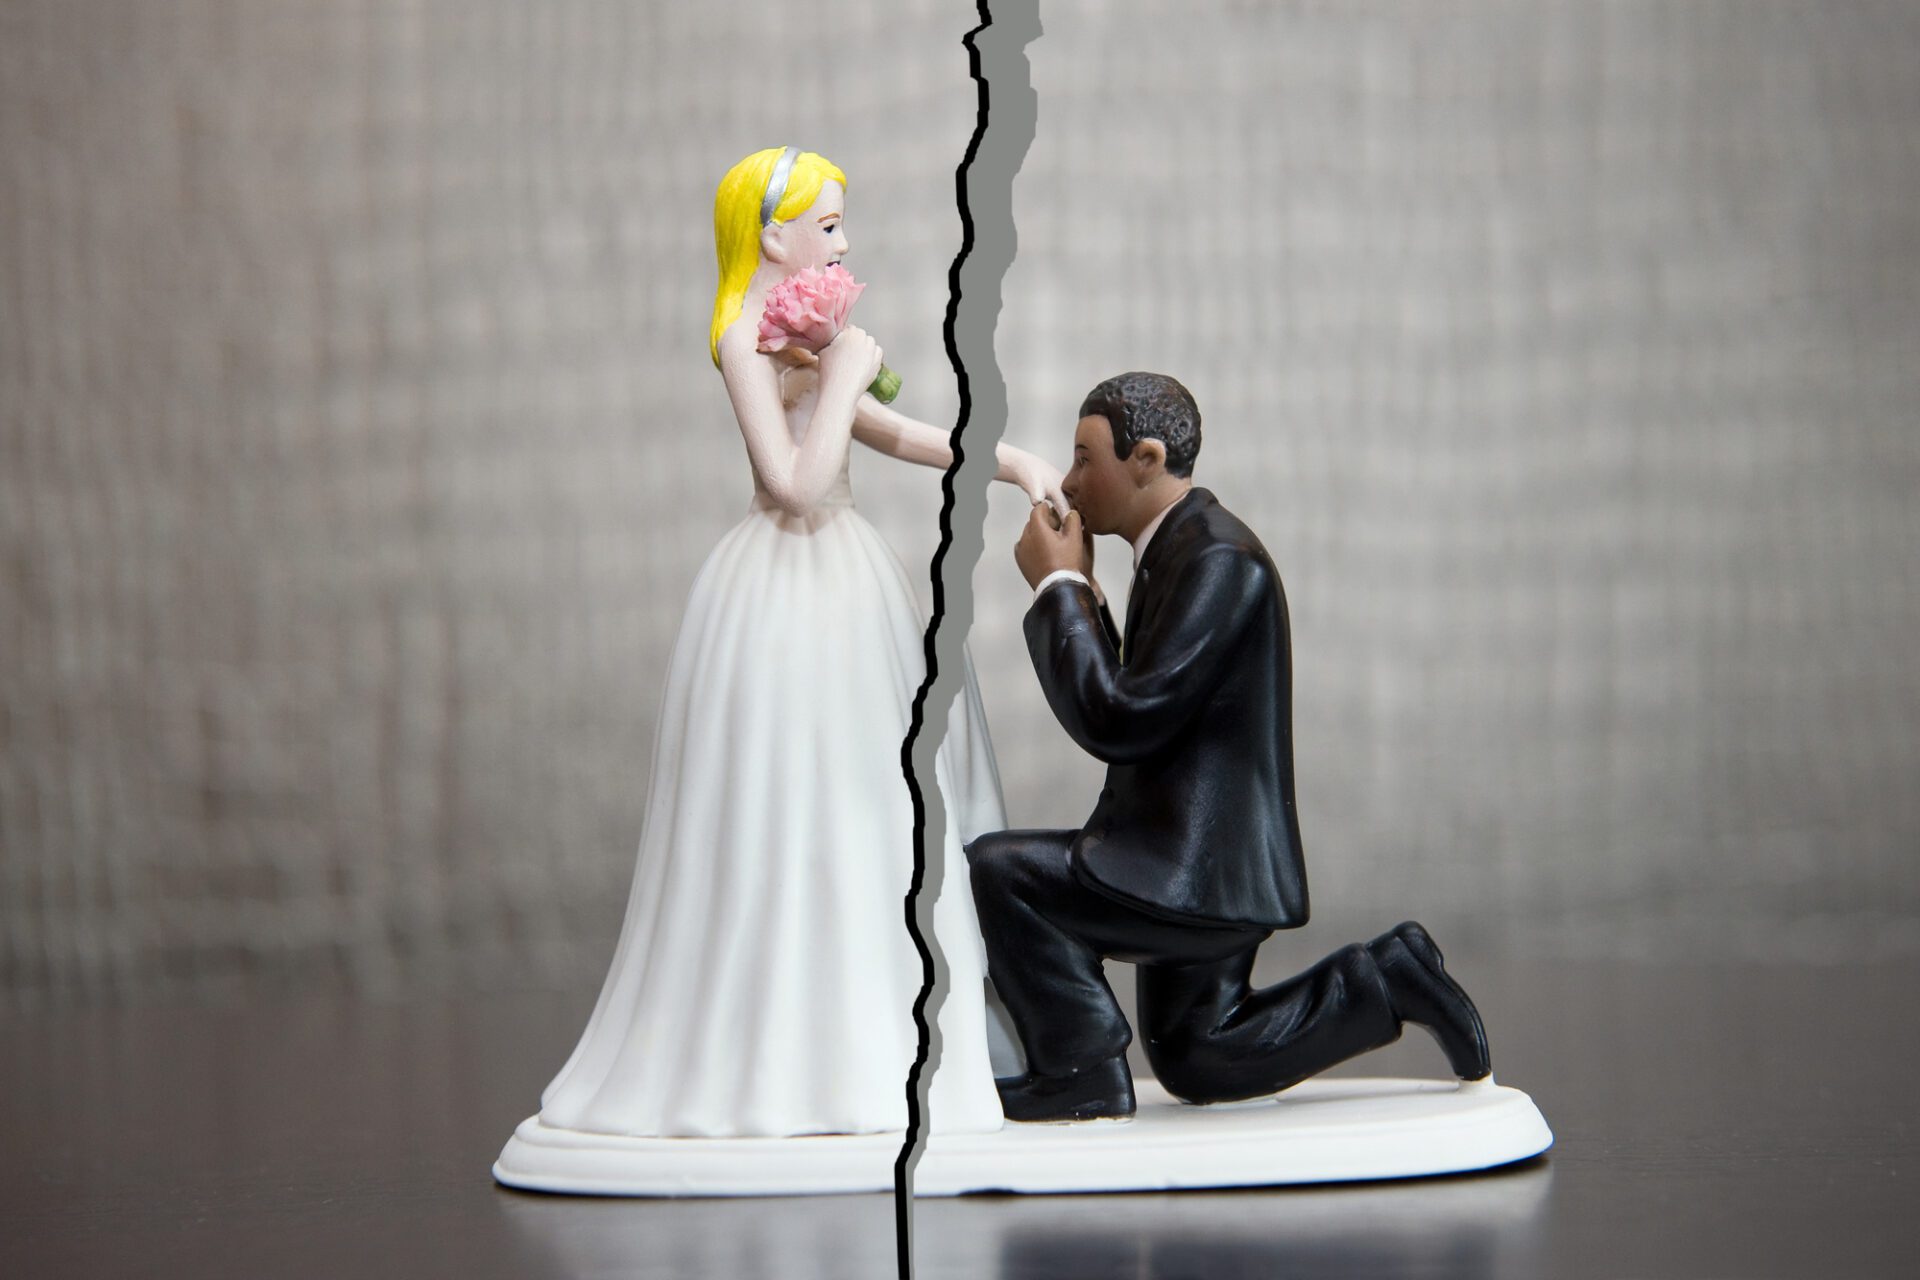 Wedding cake topper of bride and groom with slash through the image depicting divorce or annulment.